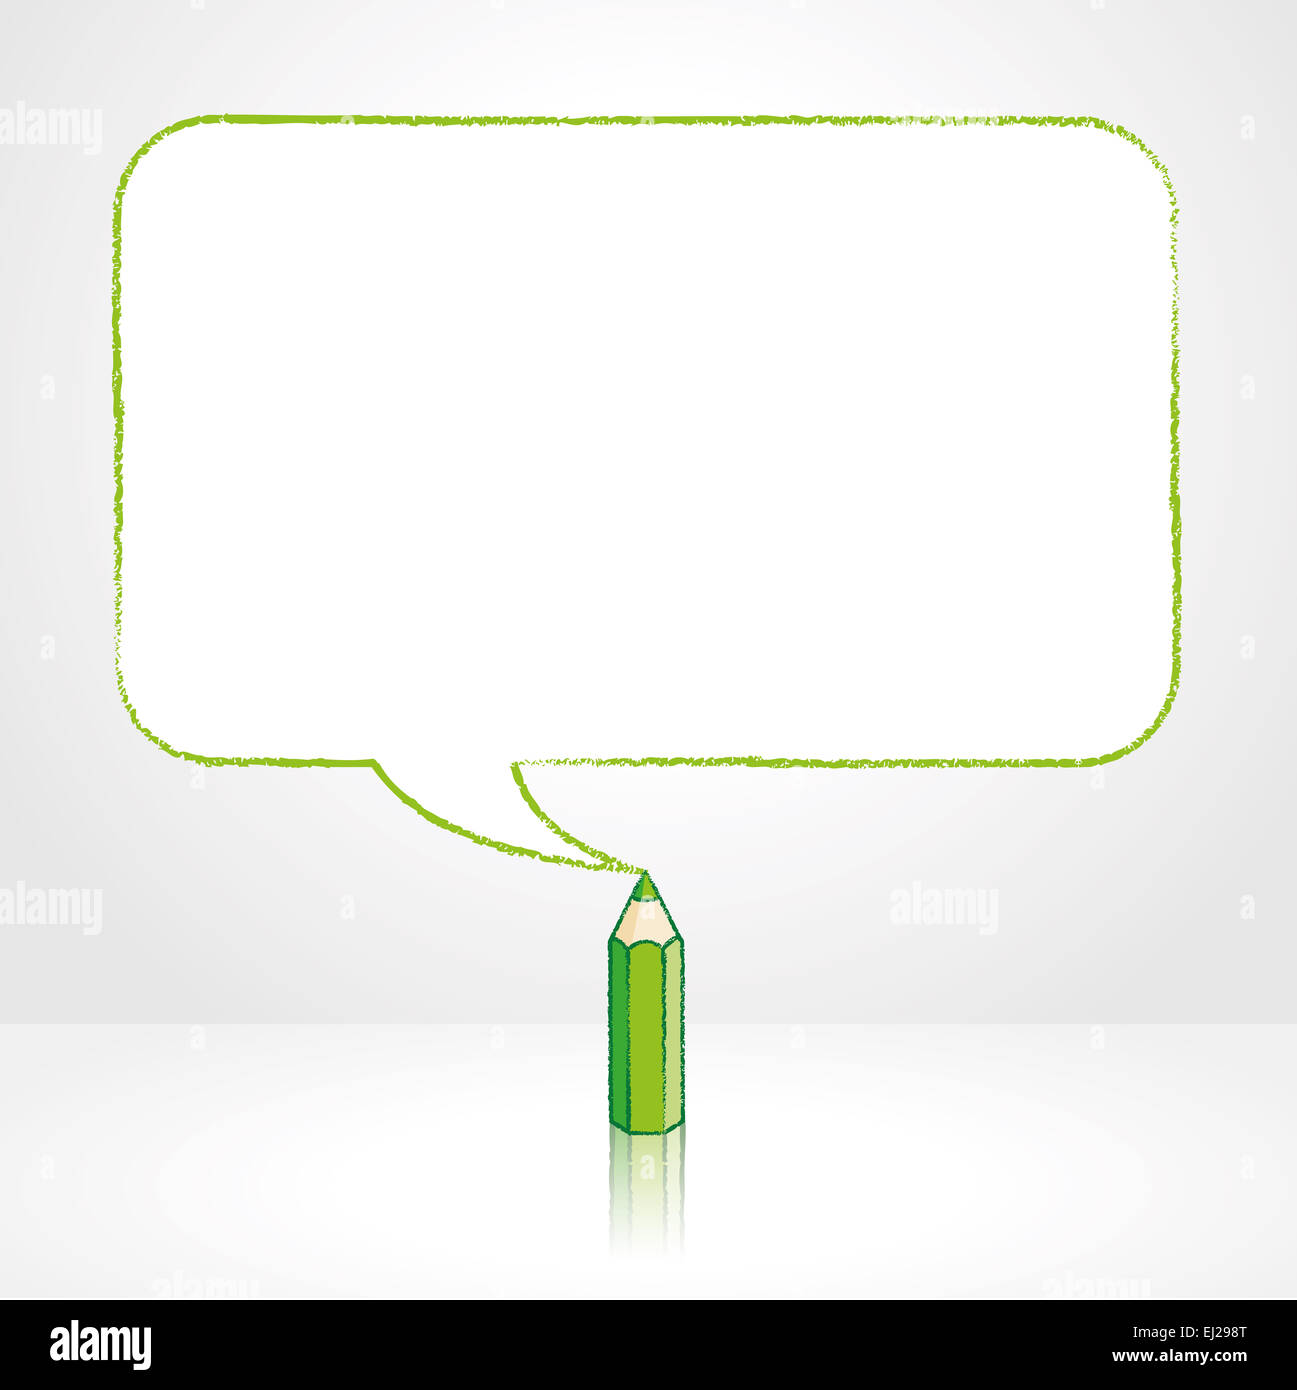 Green Pencil with Reflection Drawing Smooth Rectangular Speech Bubble on White Background Stock Photo